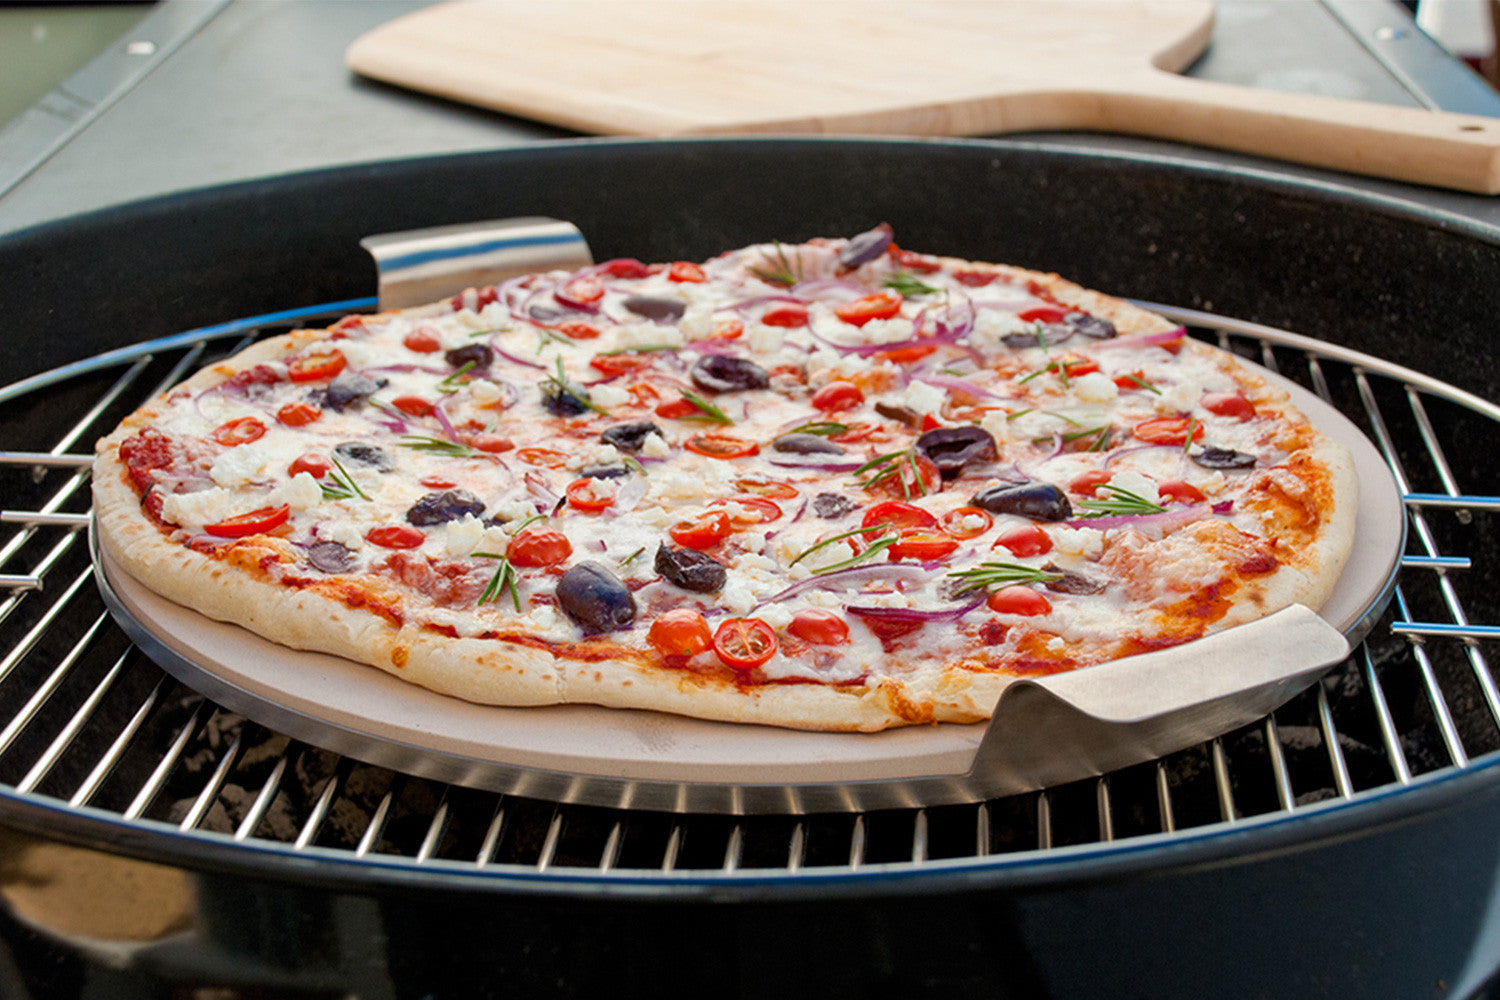 Grilling Pizza on the 15" Round Ceramic Pizza Stone with Solid Frame